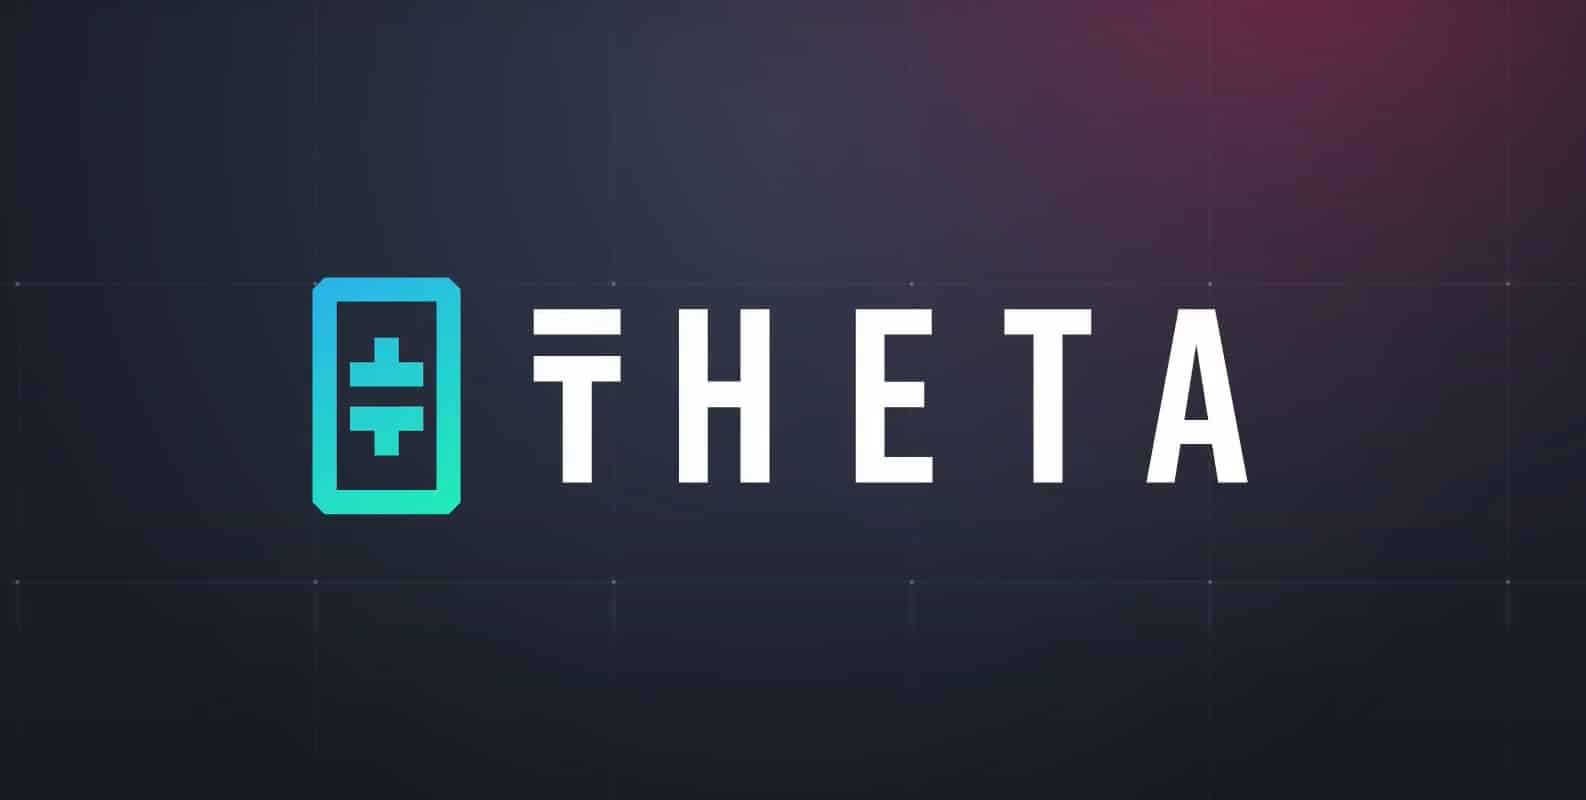 Theta price plummeted when mainnet planning was delayed